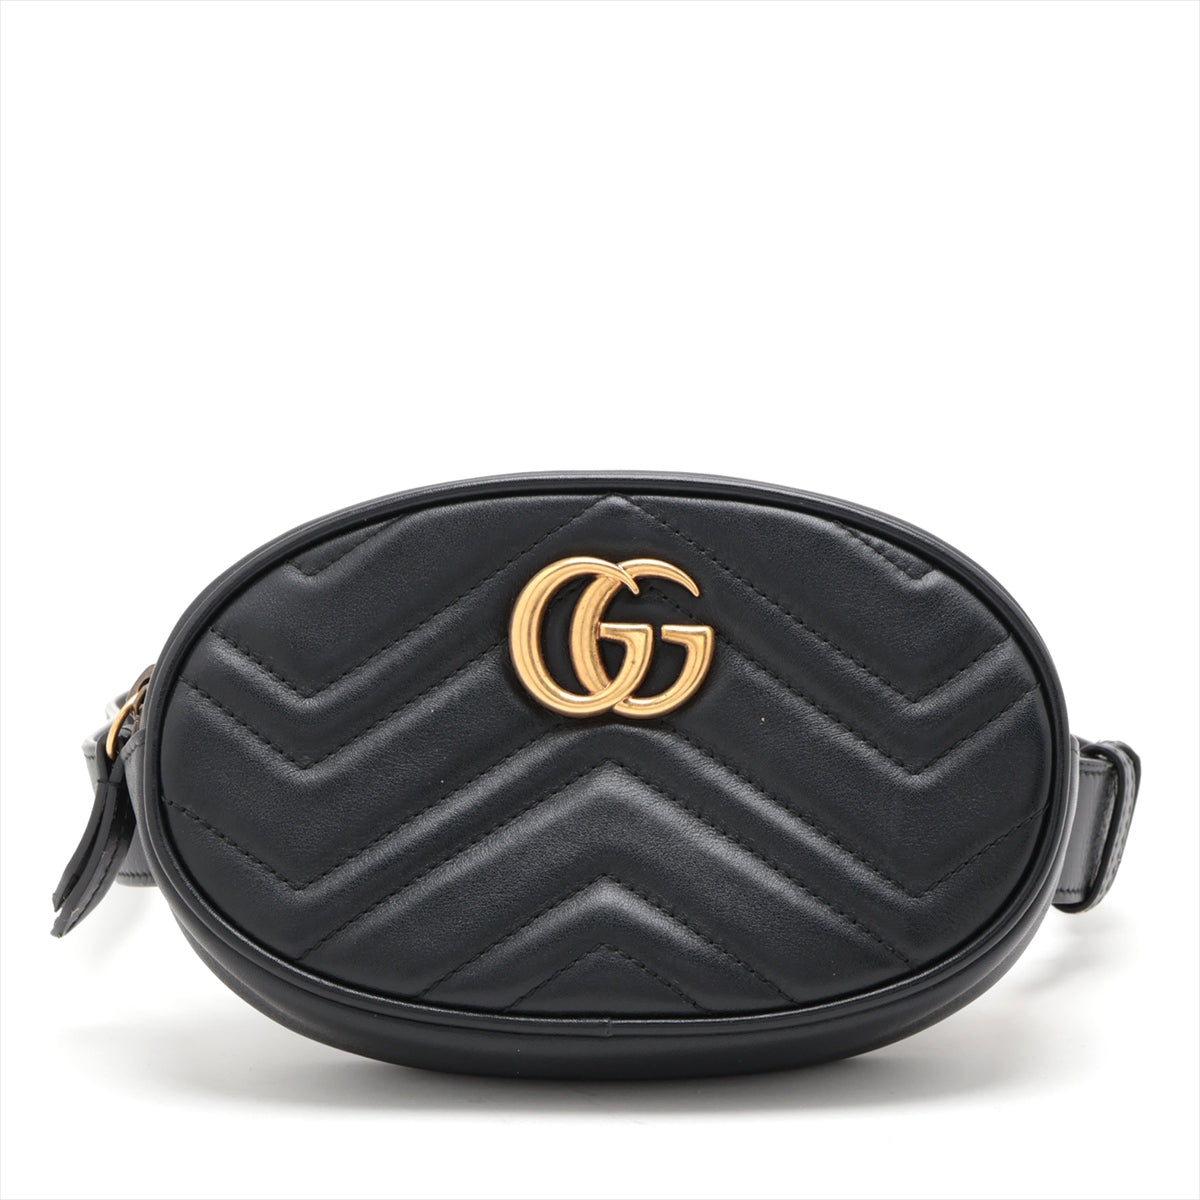 GUCCI Marmont Belt Bag in Leather Black 476434 Ladies